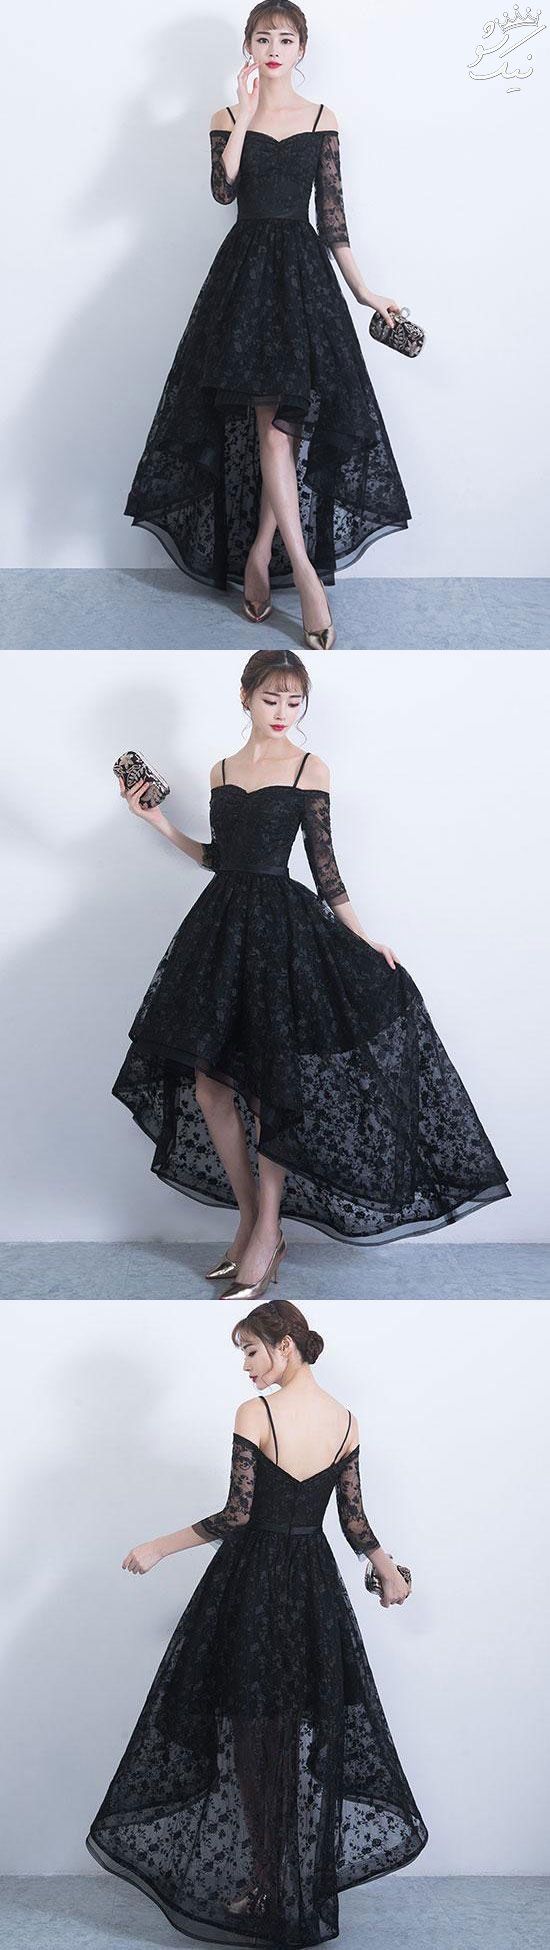 Black Lace Lovely Prom Dresses 2019, Lovely Party Dresses 2019